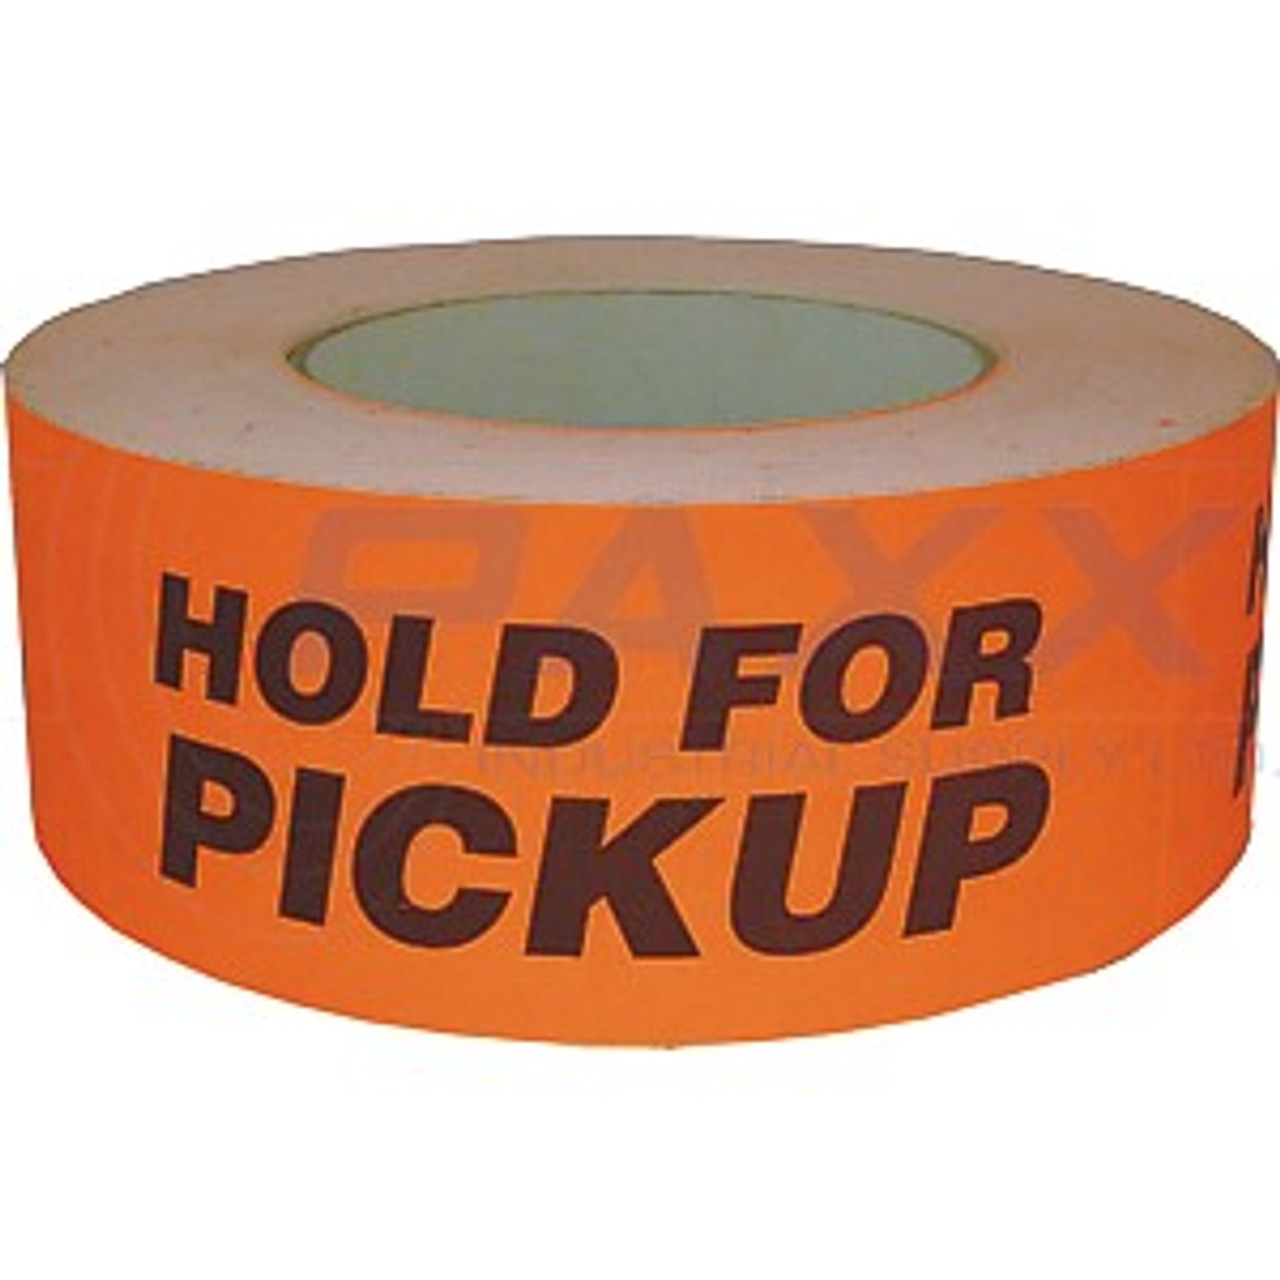 HOLD FOR PICKUP 2" x 5" Label